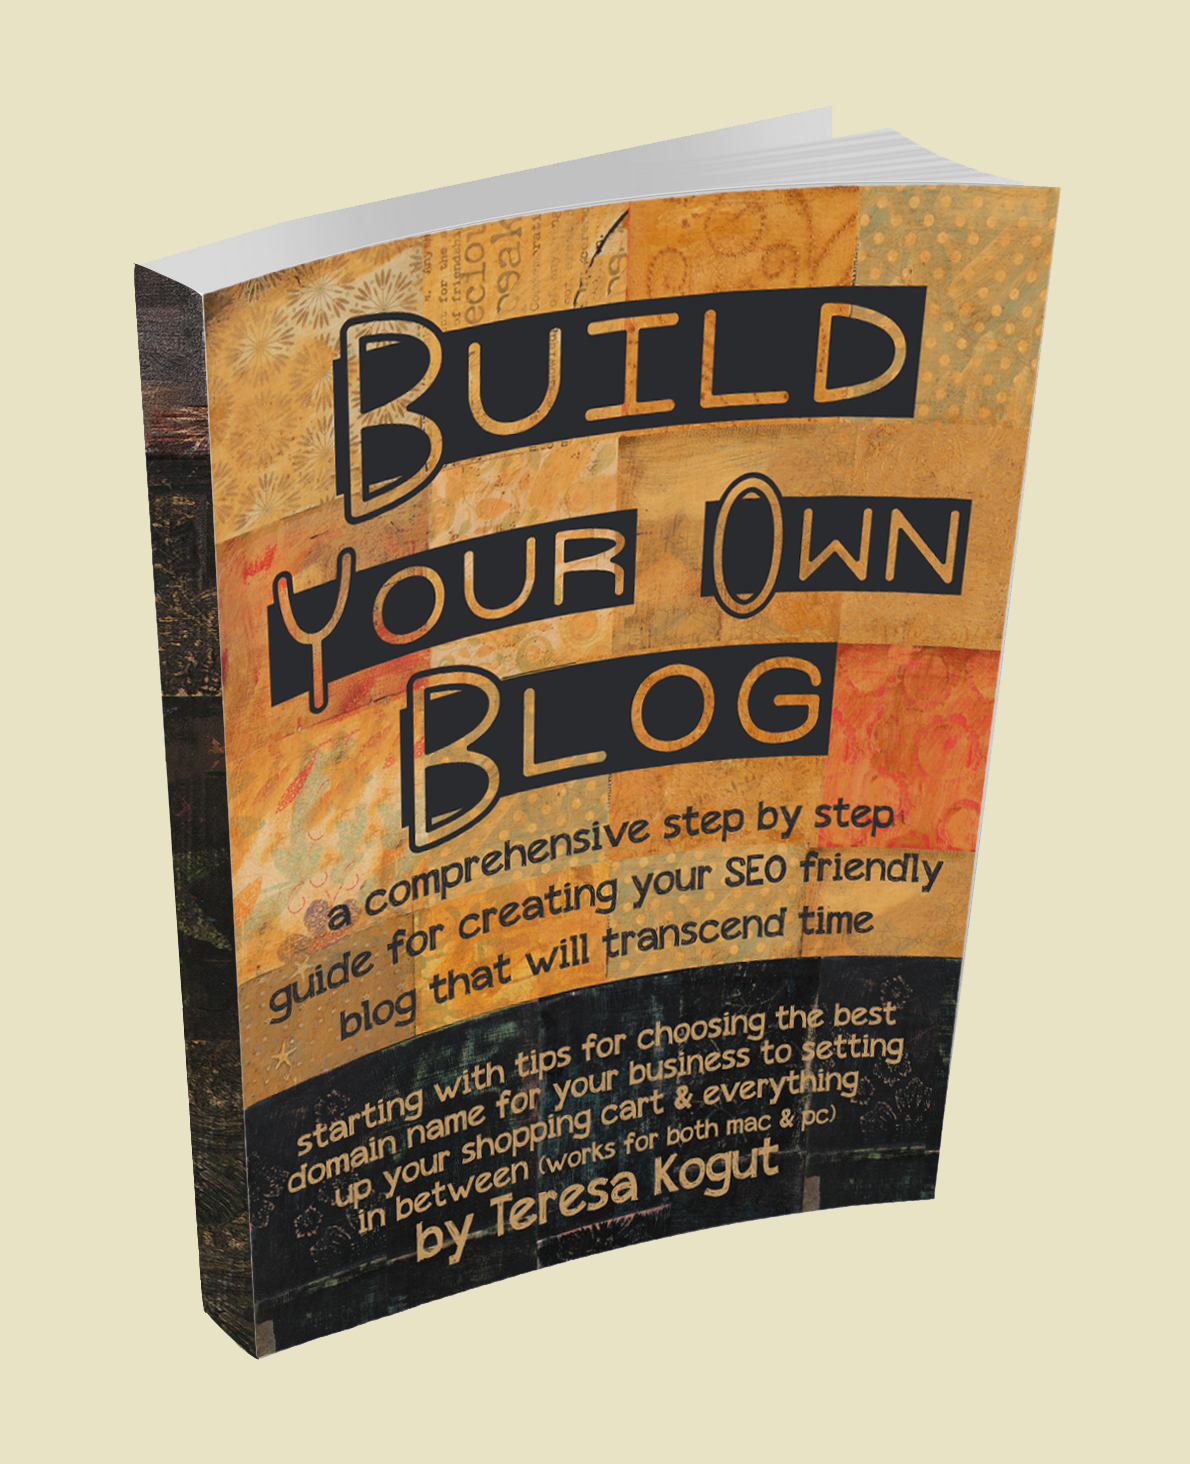 blog, build your own, website, site, 